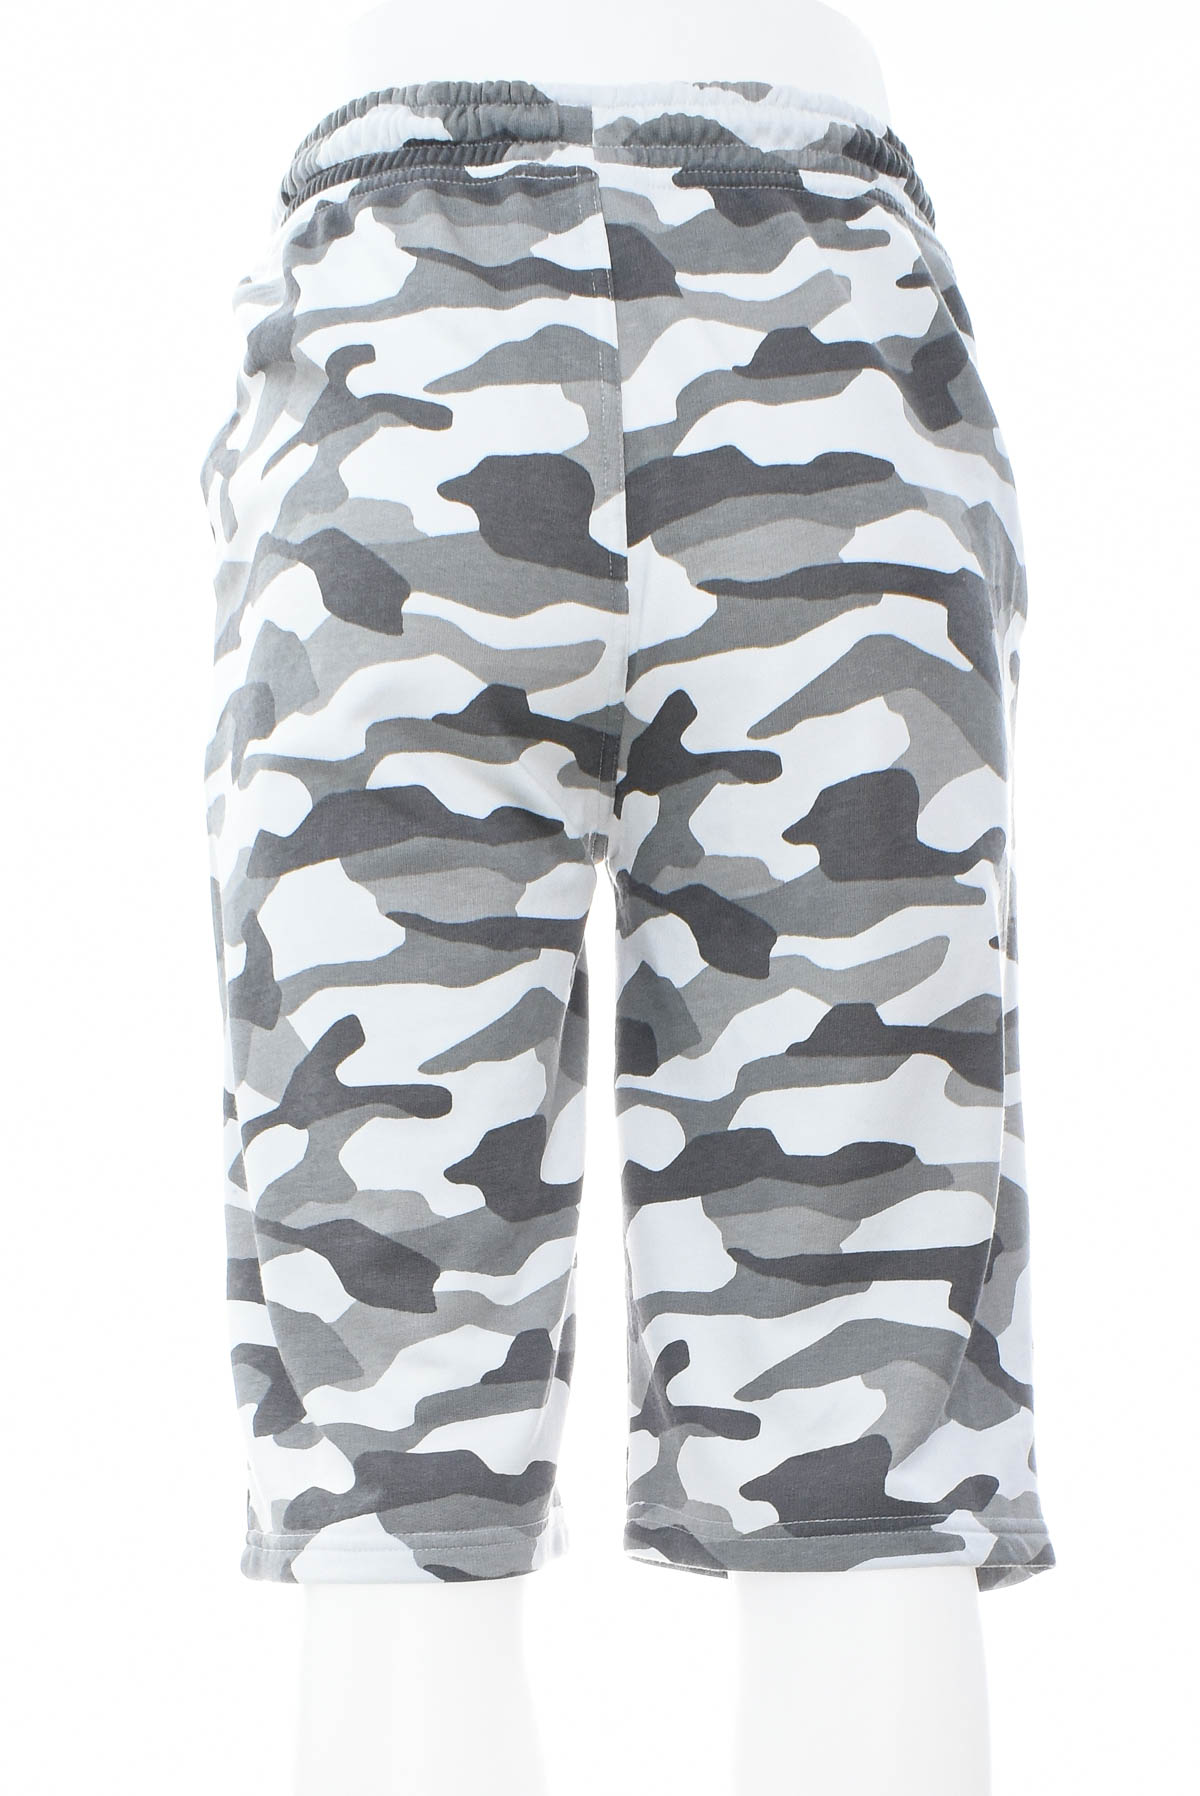 Shorts for boys - C&A - 1